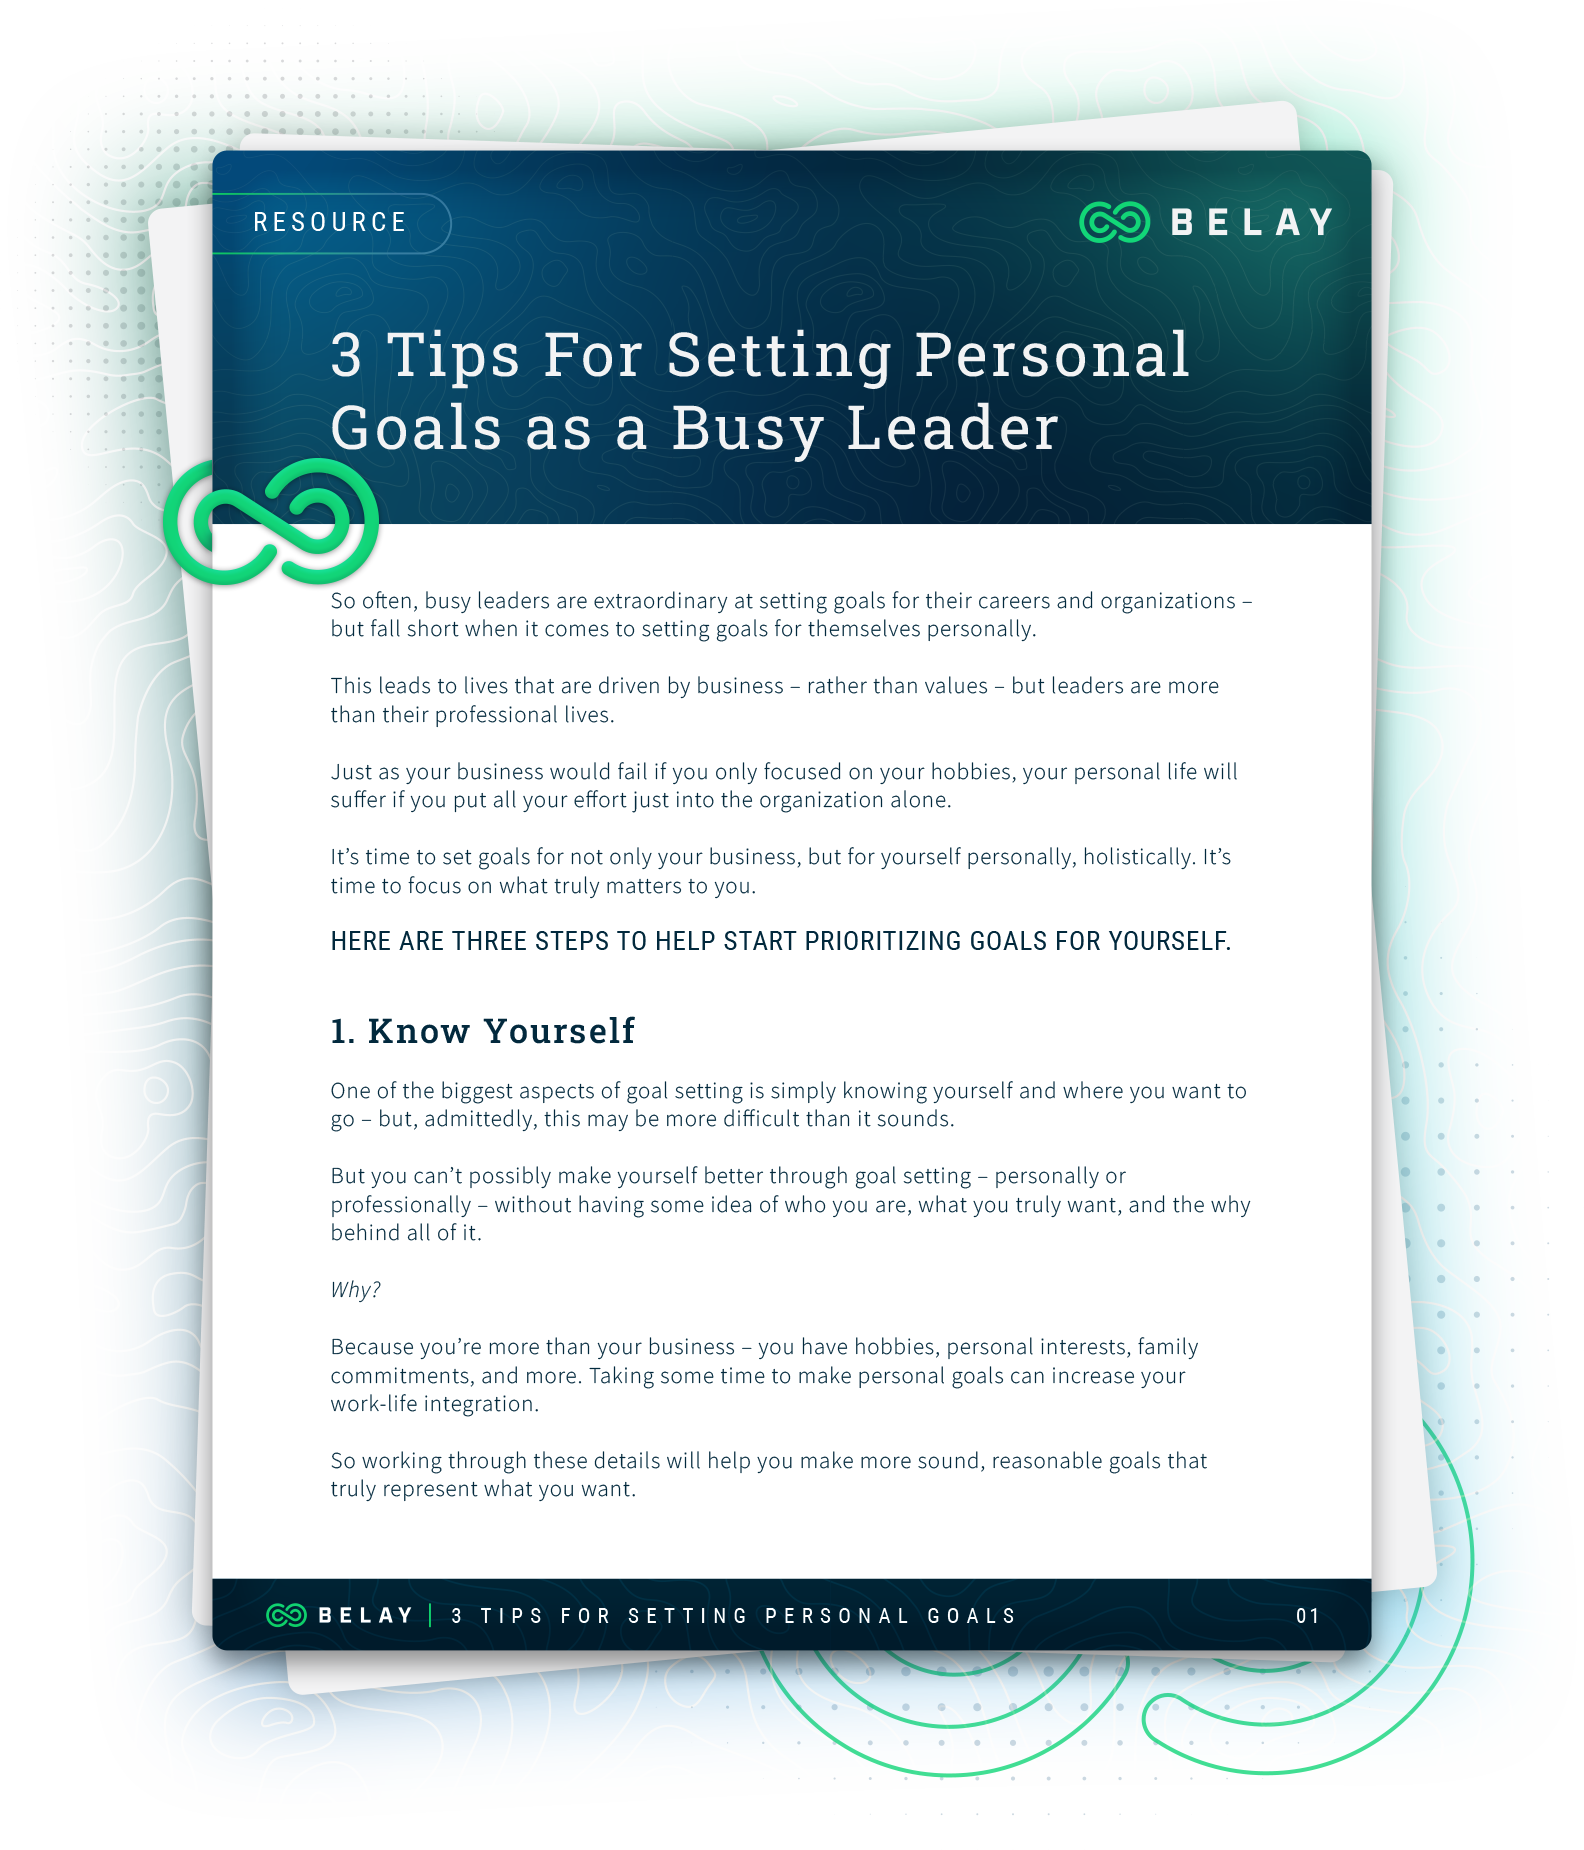 3 Tips For Setting Personal Goals as a Busy Leader